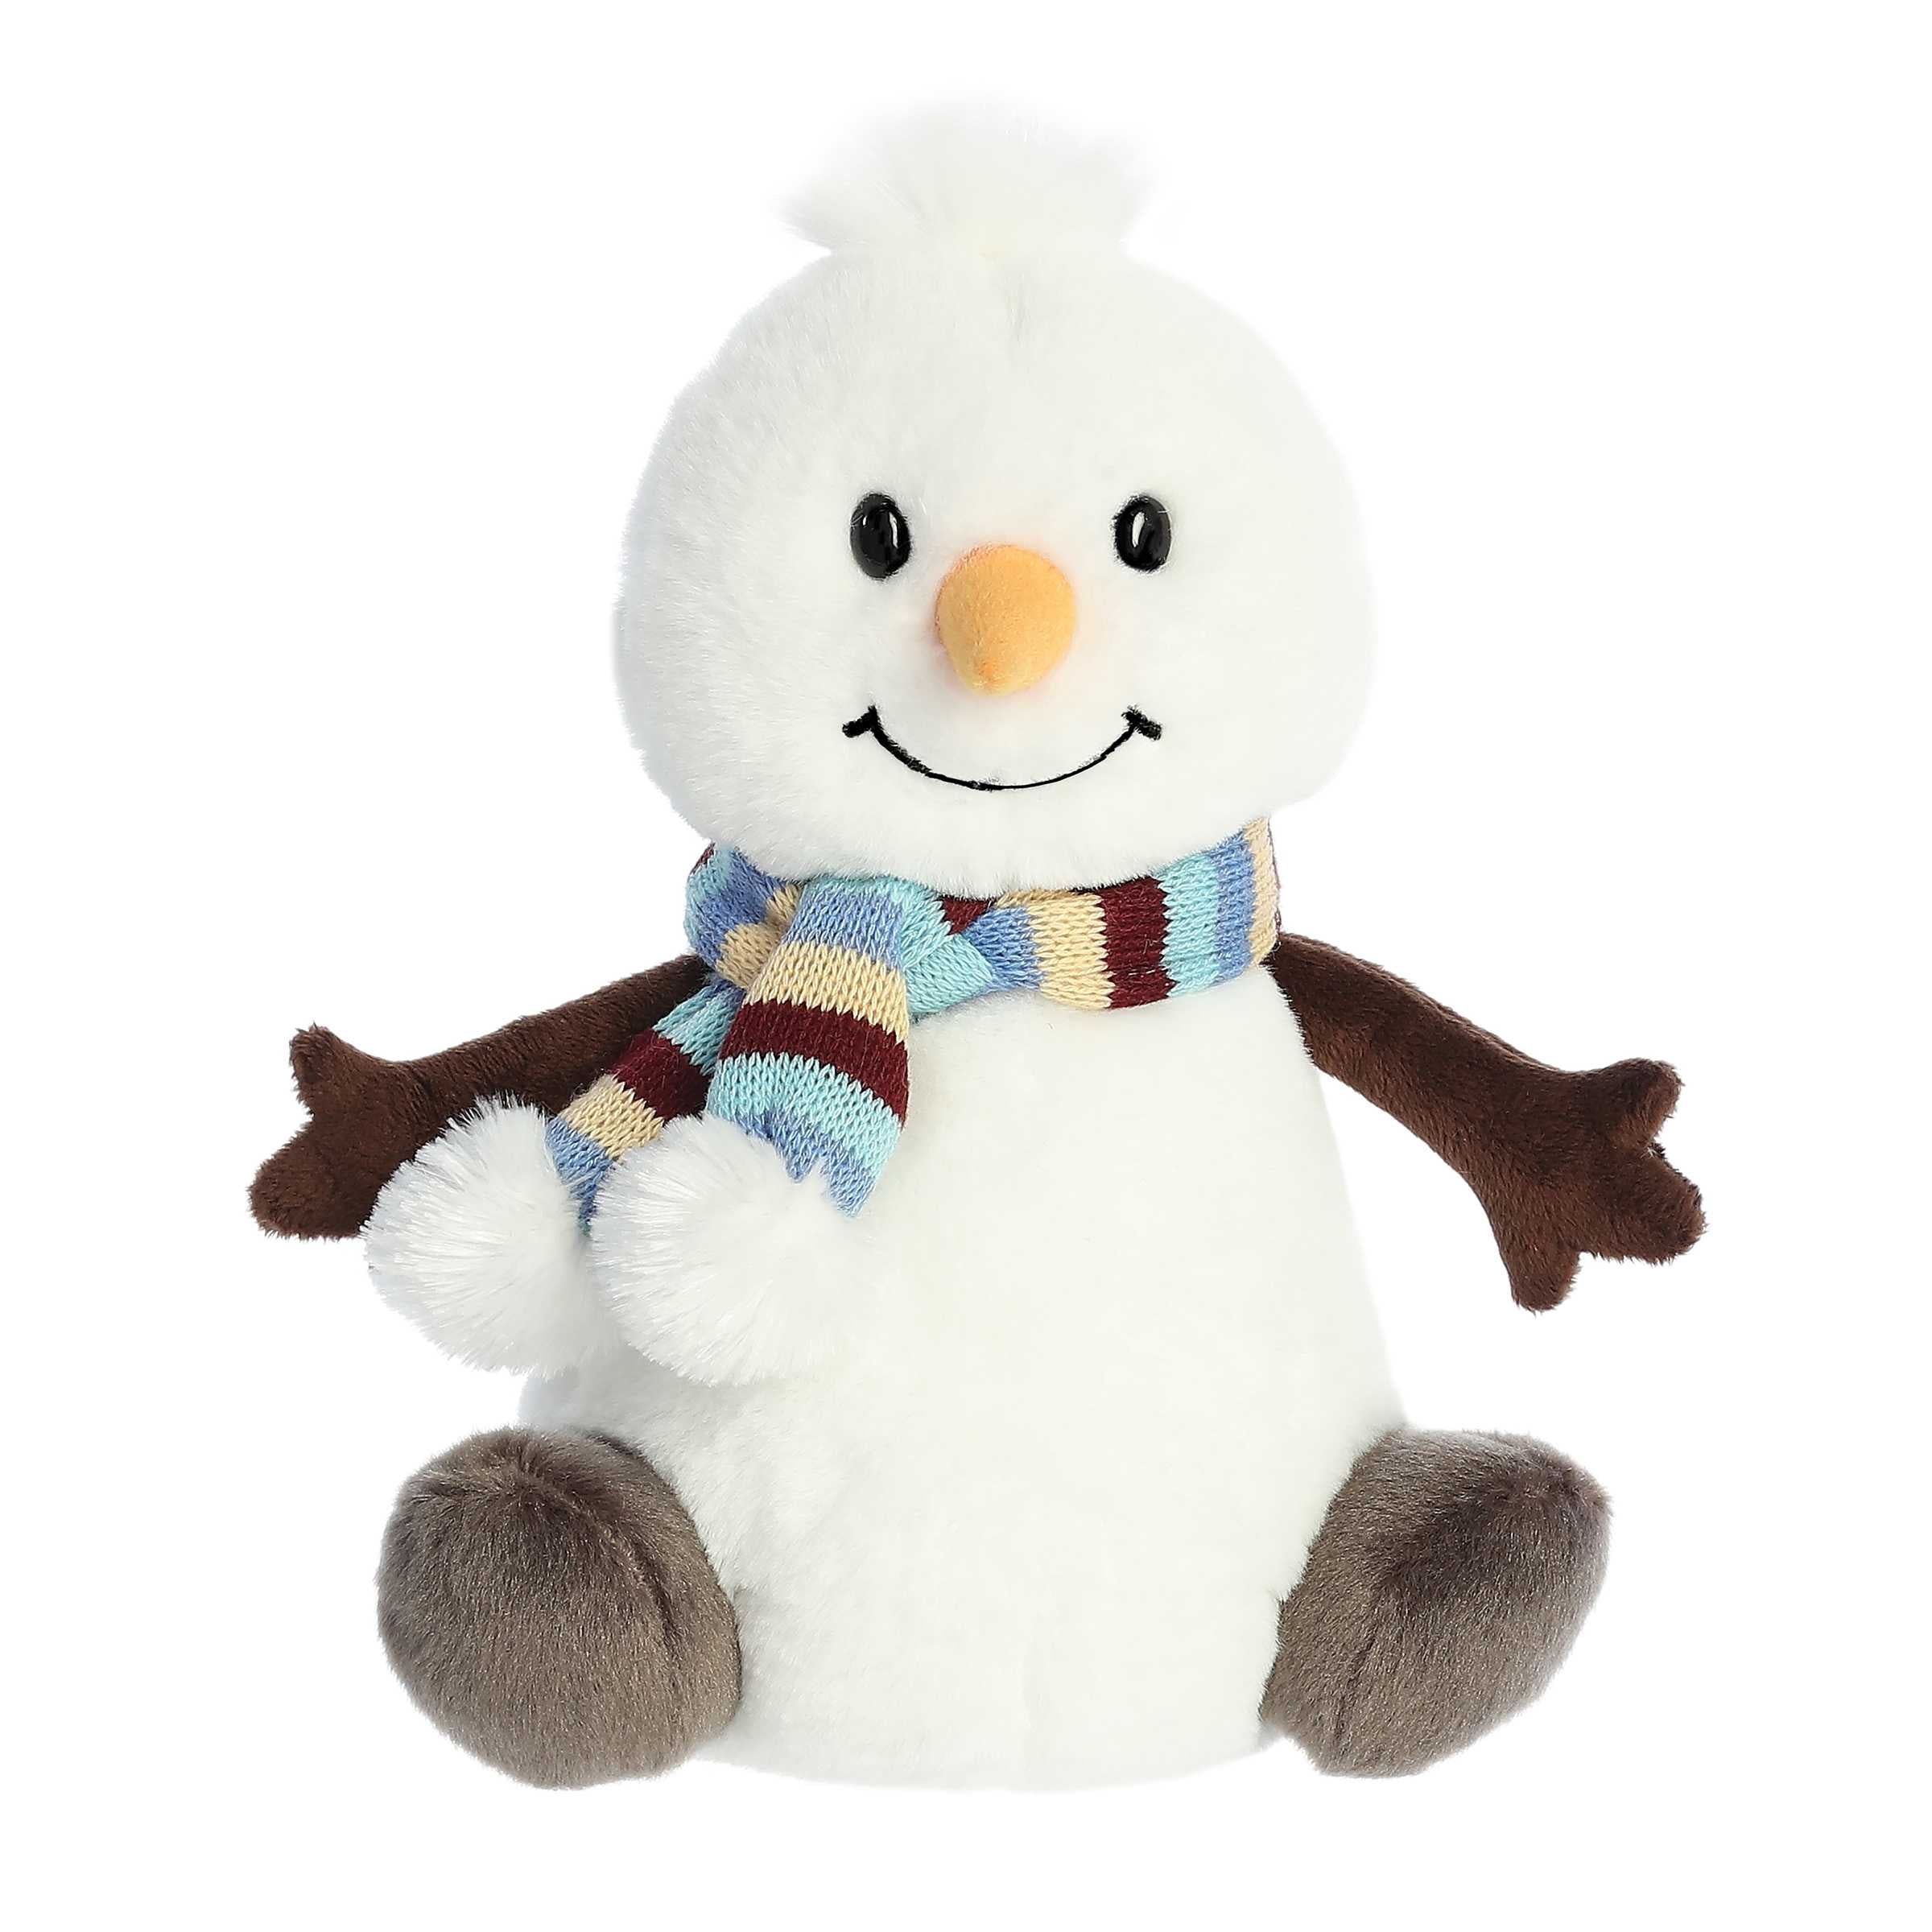 Smiling white snowman plushie with stick arms tiny feet wearing a cozy winter scarf and carrot nose